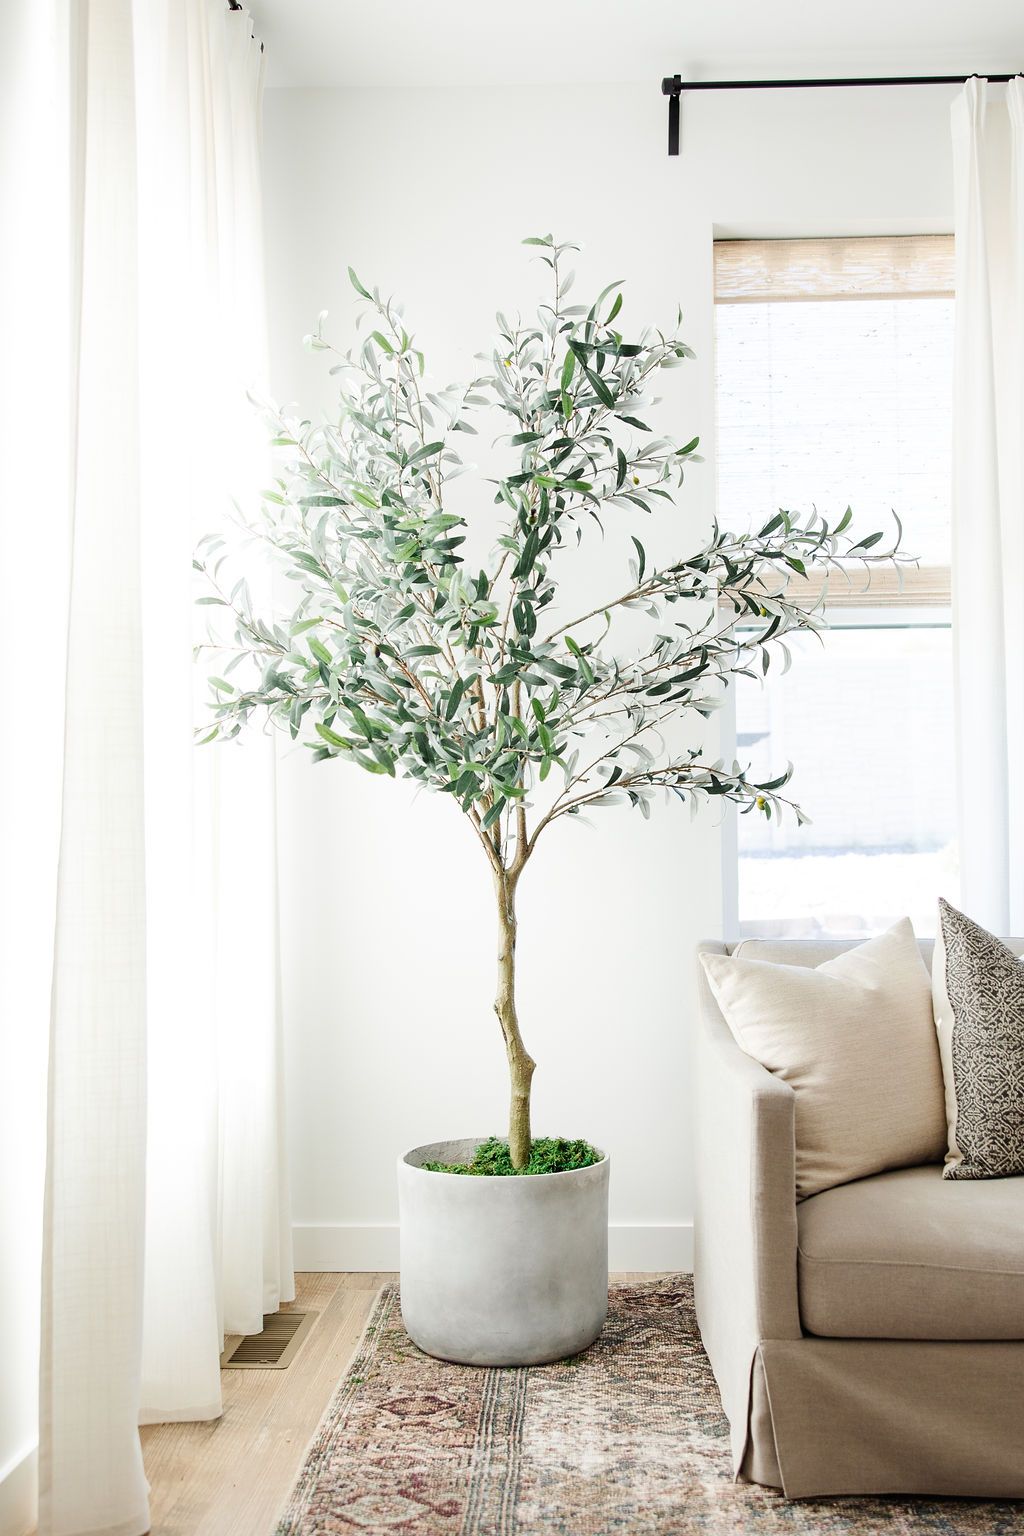 lifestyle shot of a living room sitting area with a potted tree in the center of the image and white walls and white curtains with light shining through